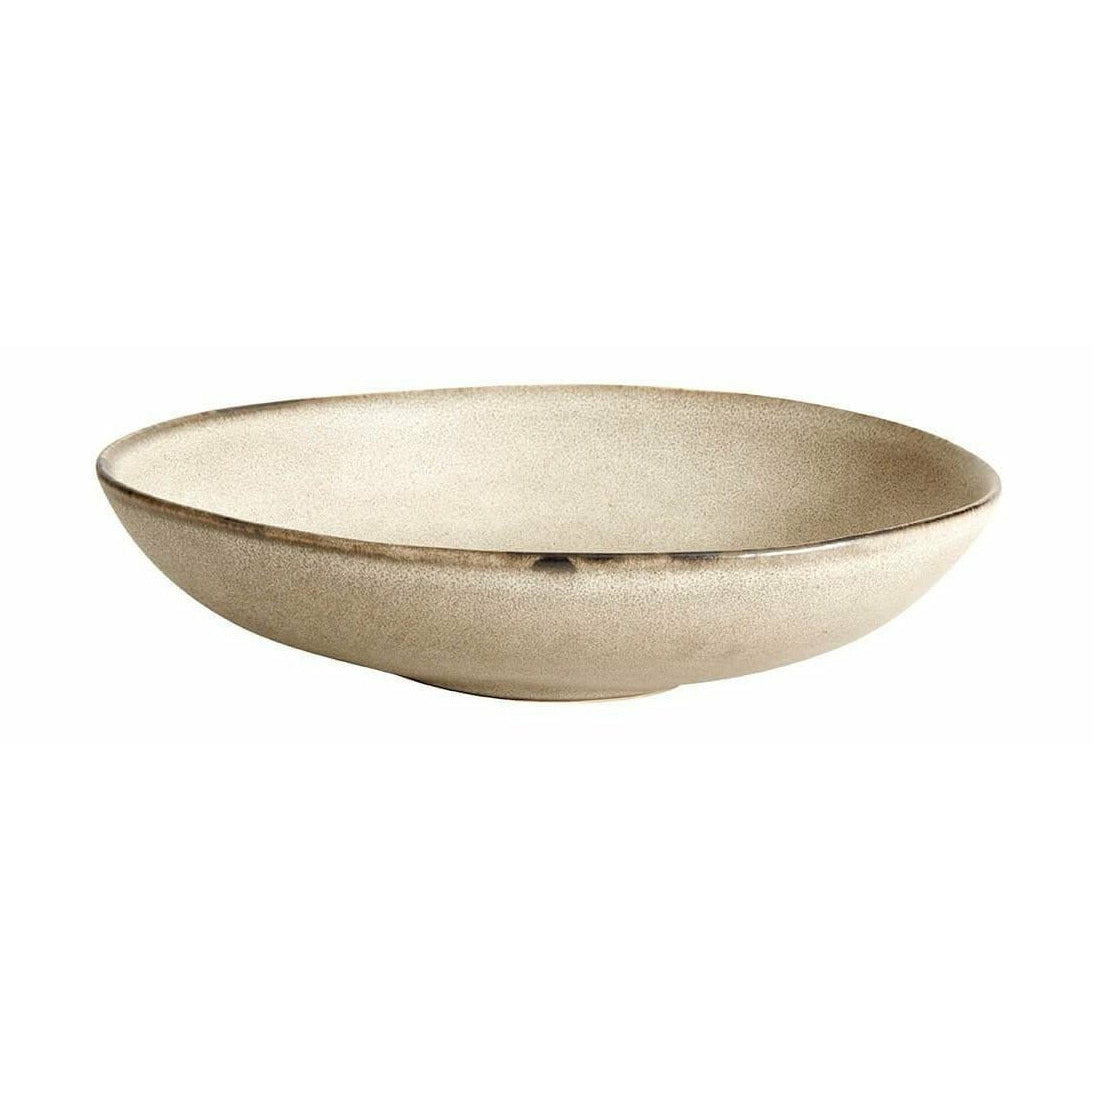 Muubs Mame serwing Bowl Oyster, 19 cm